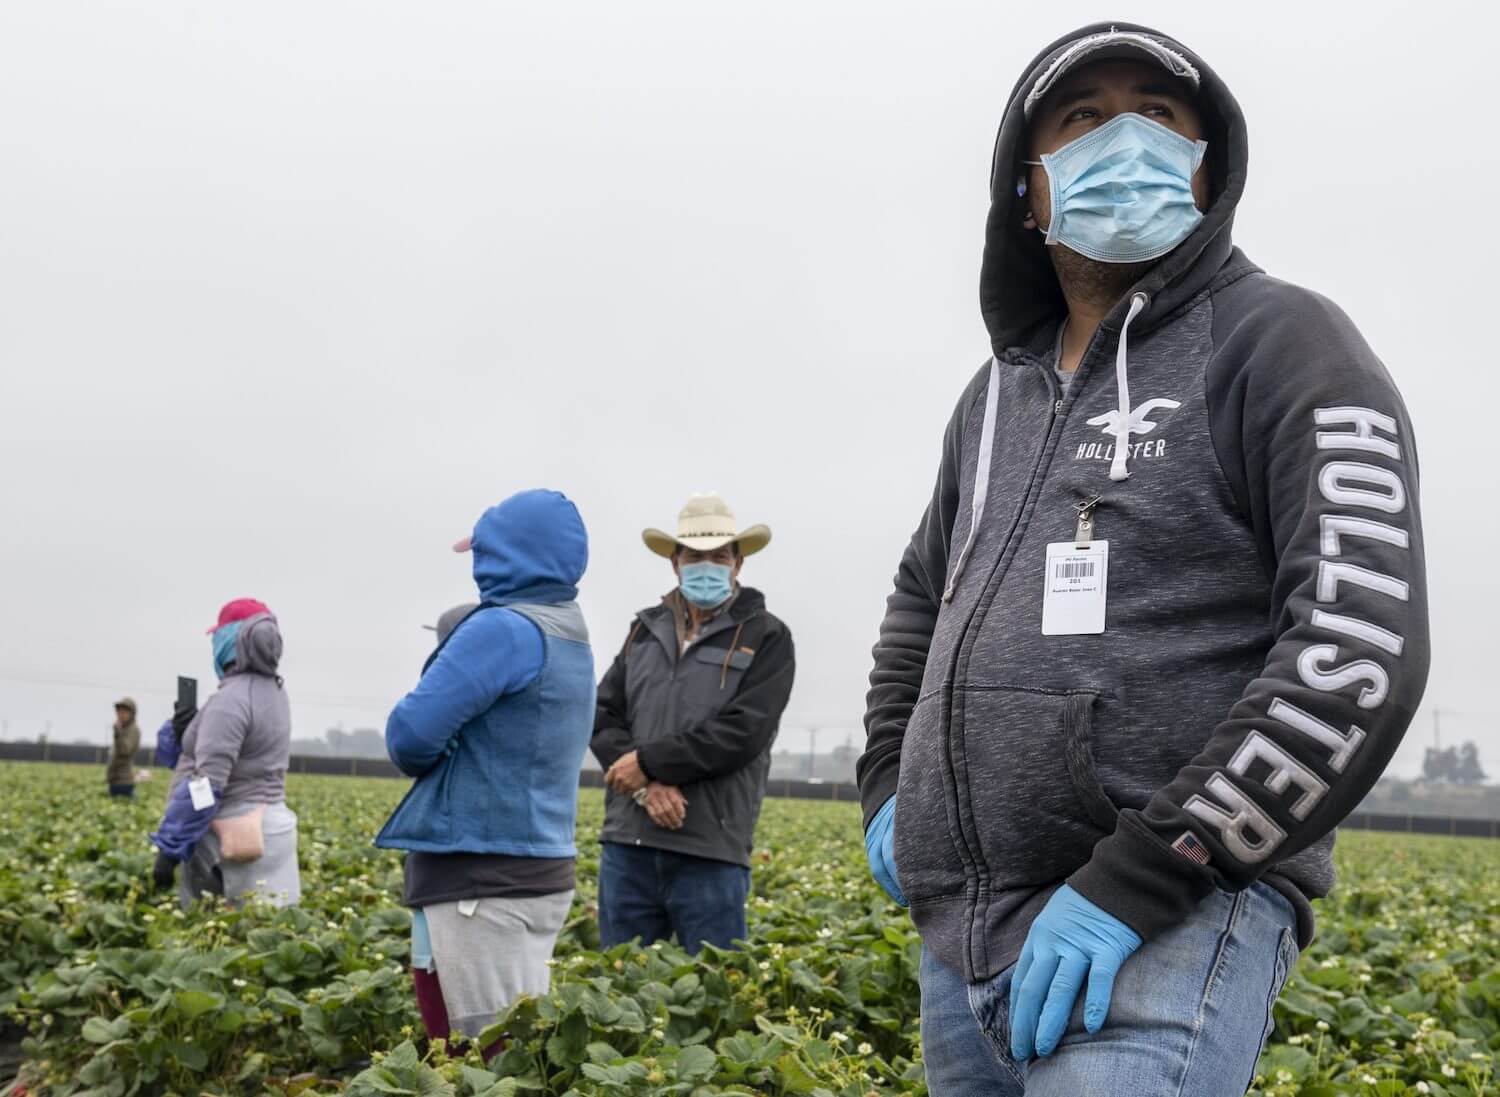 Up close profile of worker in field wearing a mask and gloves with workers in the background. August 2020